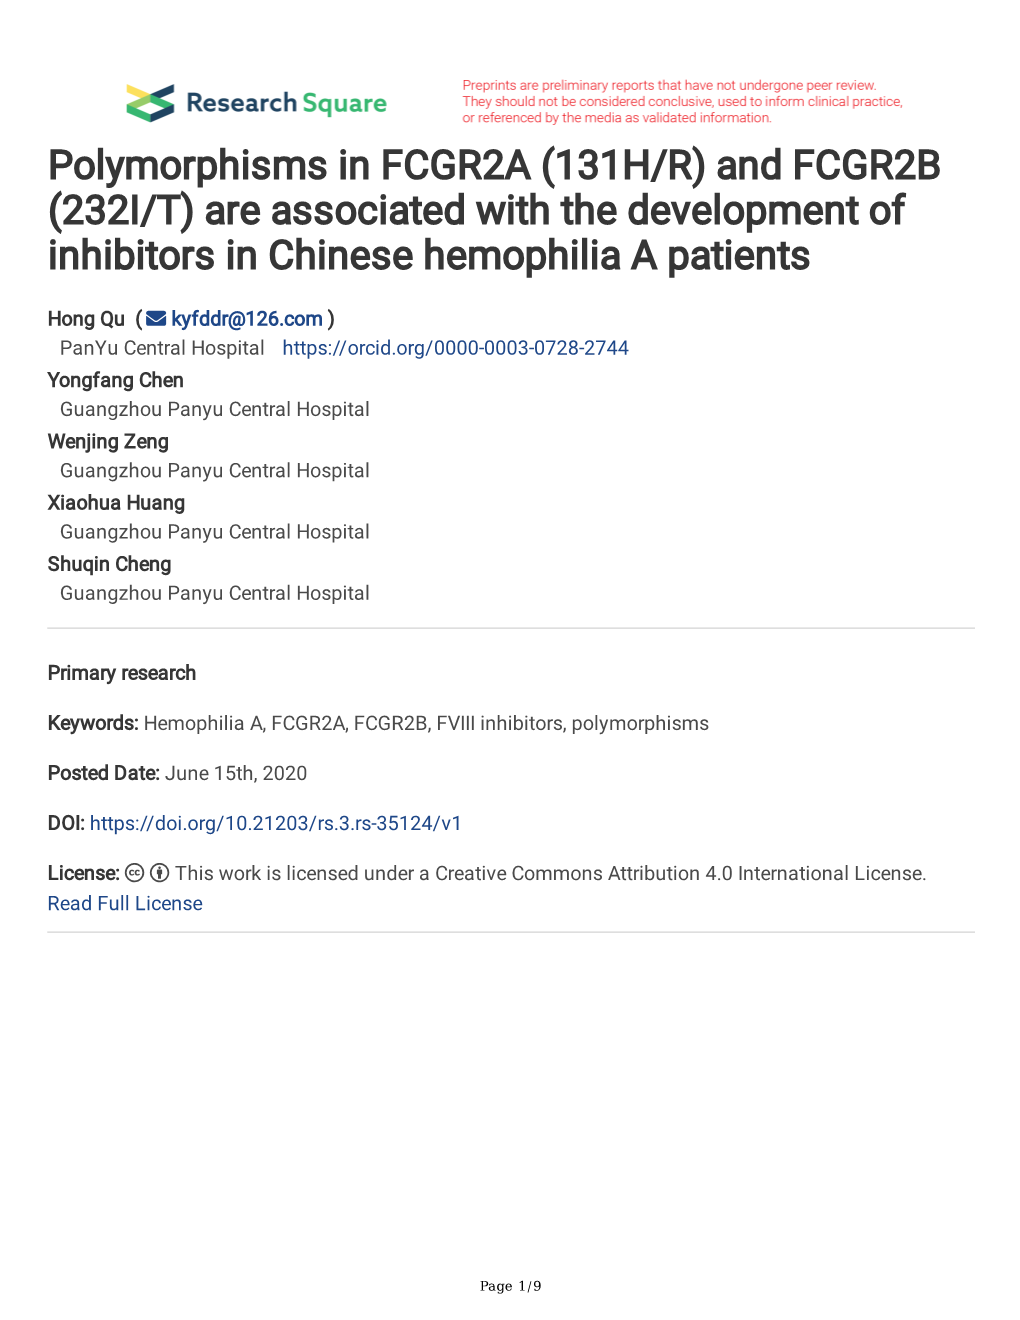 Polymorphisms in FCGR2A (131H/R) and FCGR2B (232I/T) Are Associated with the Development of Inhibitors in Chinese Hemophilia a Patients